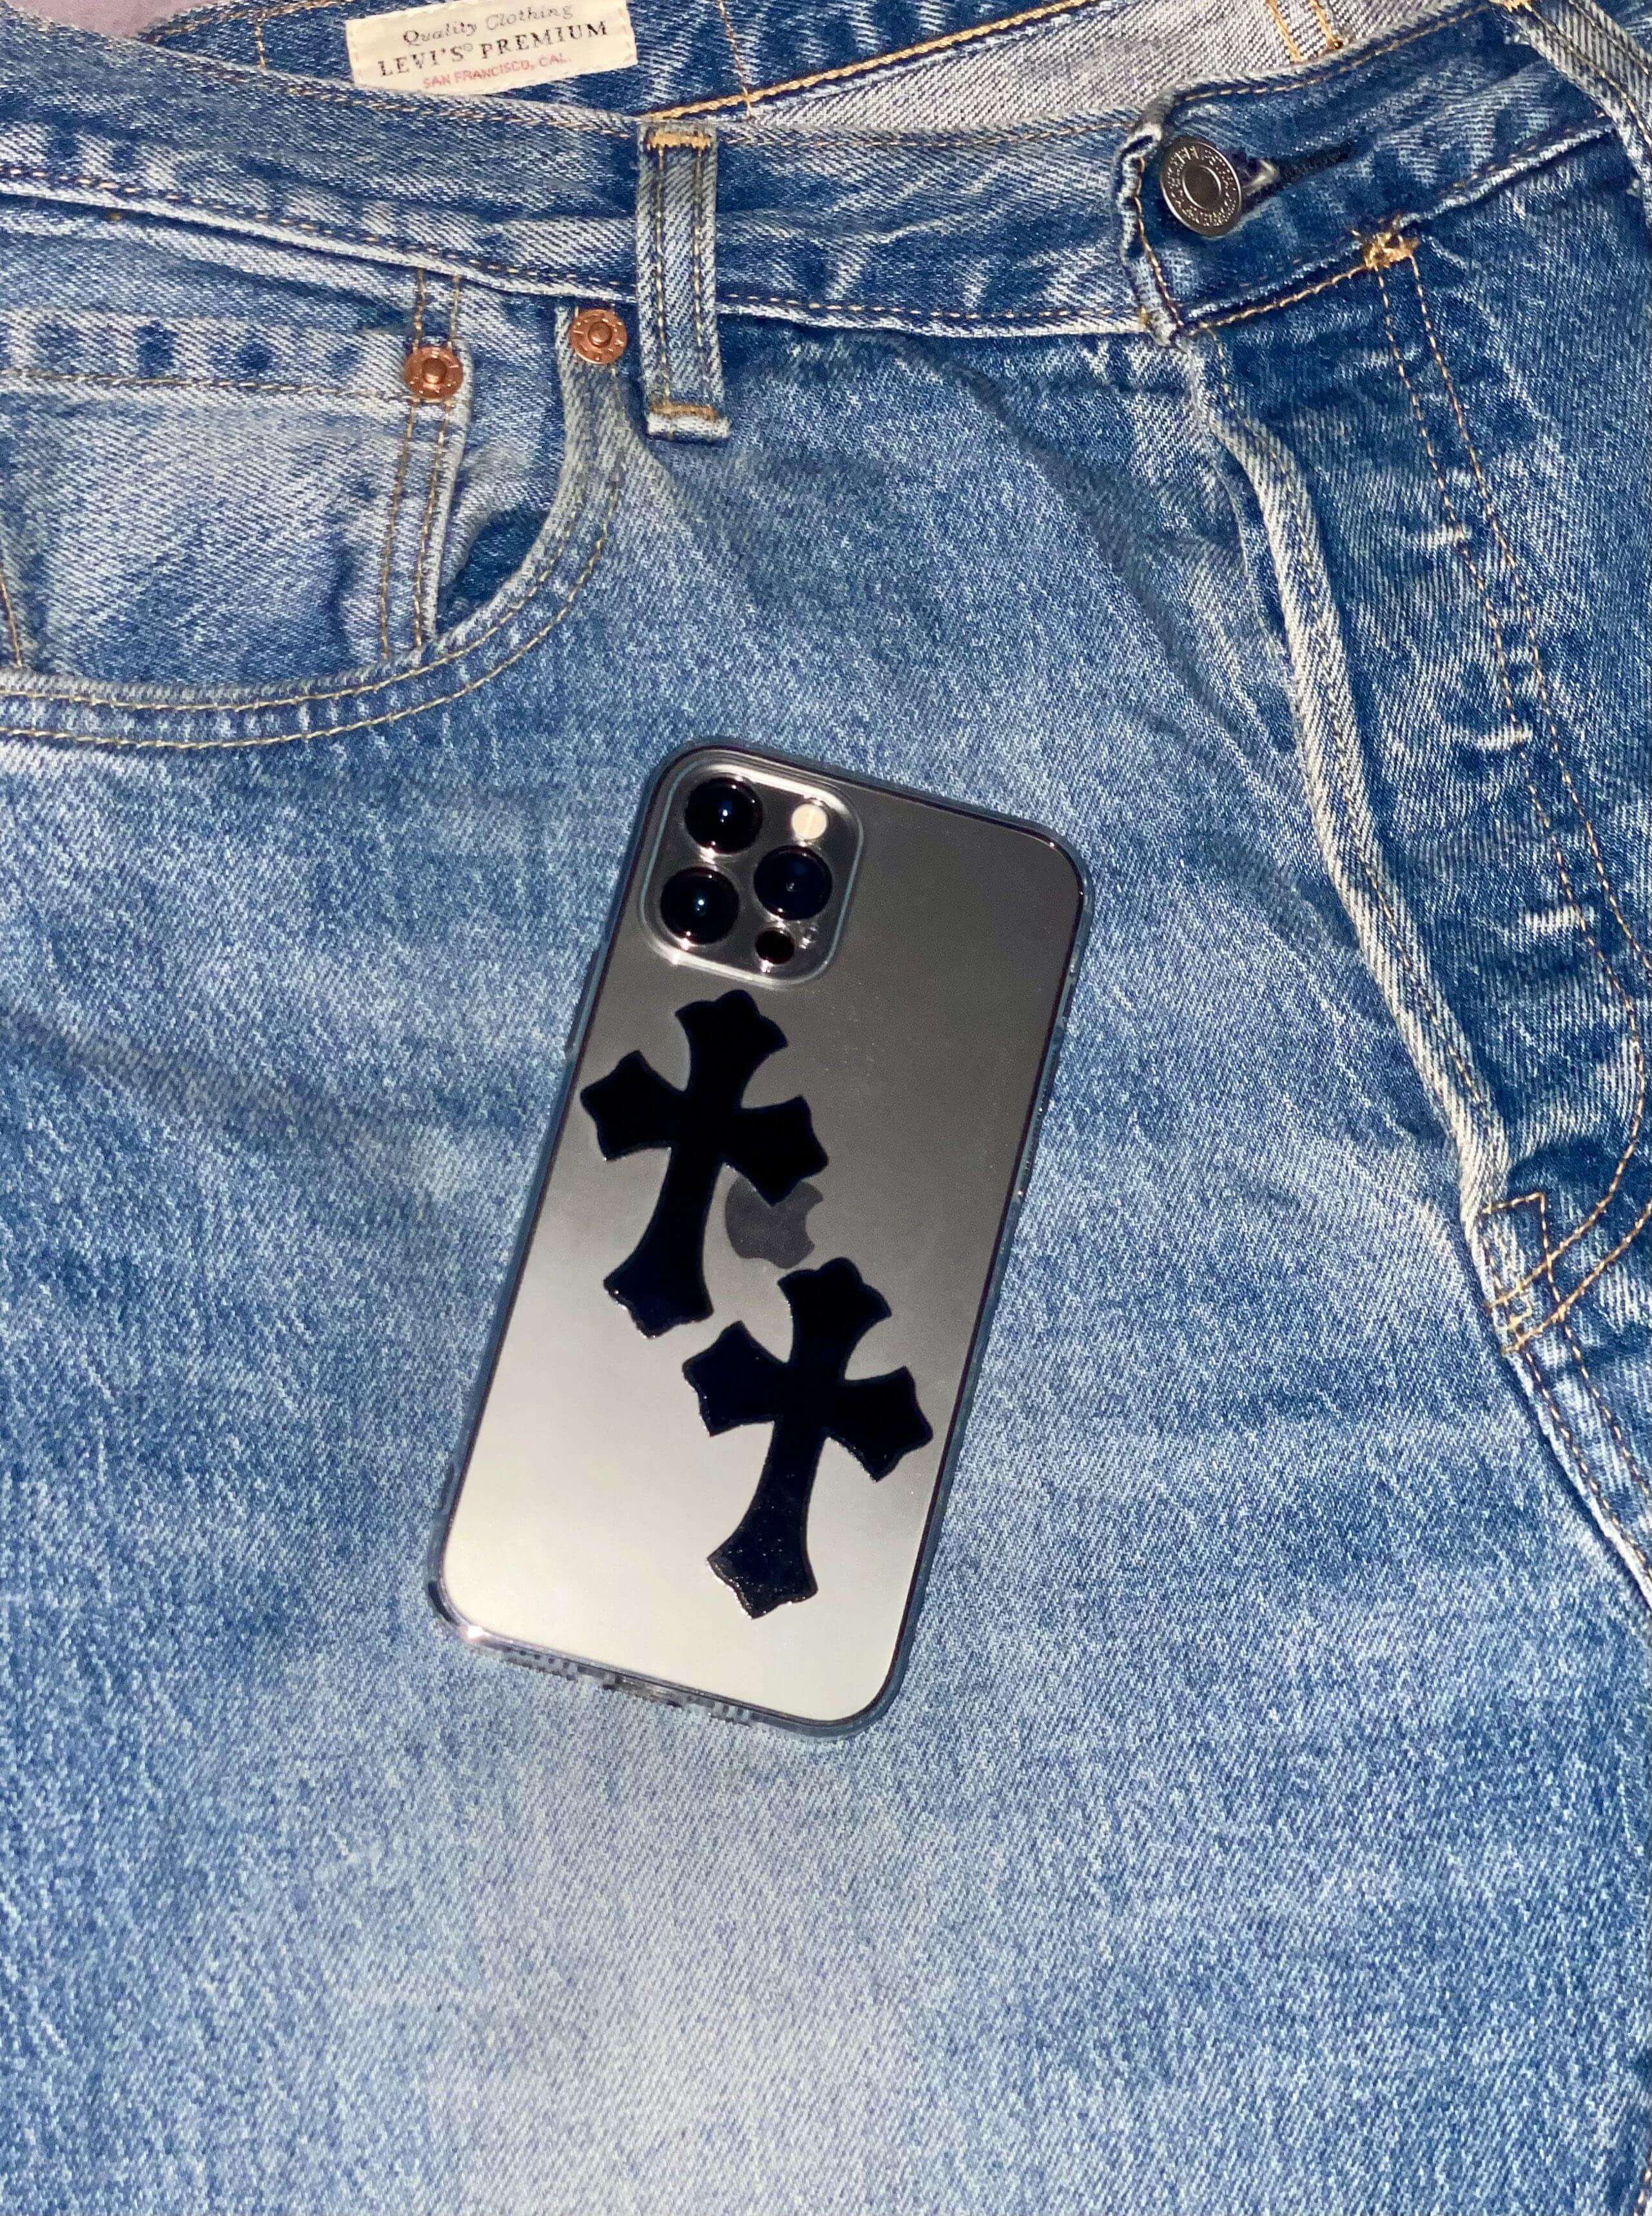 Cross Patch Chrome Hearts Inspired iPhone Case